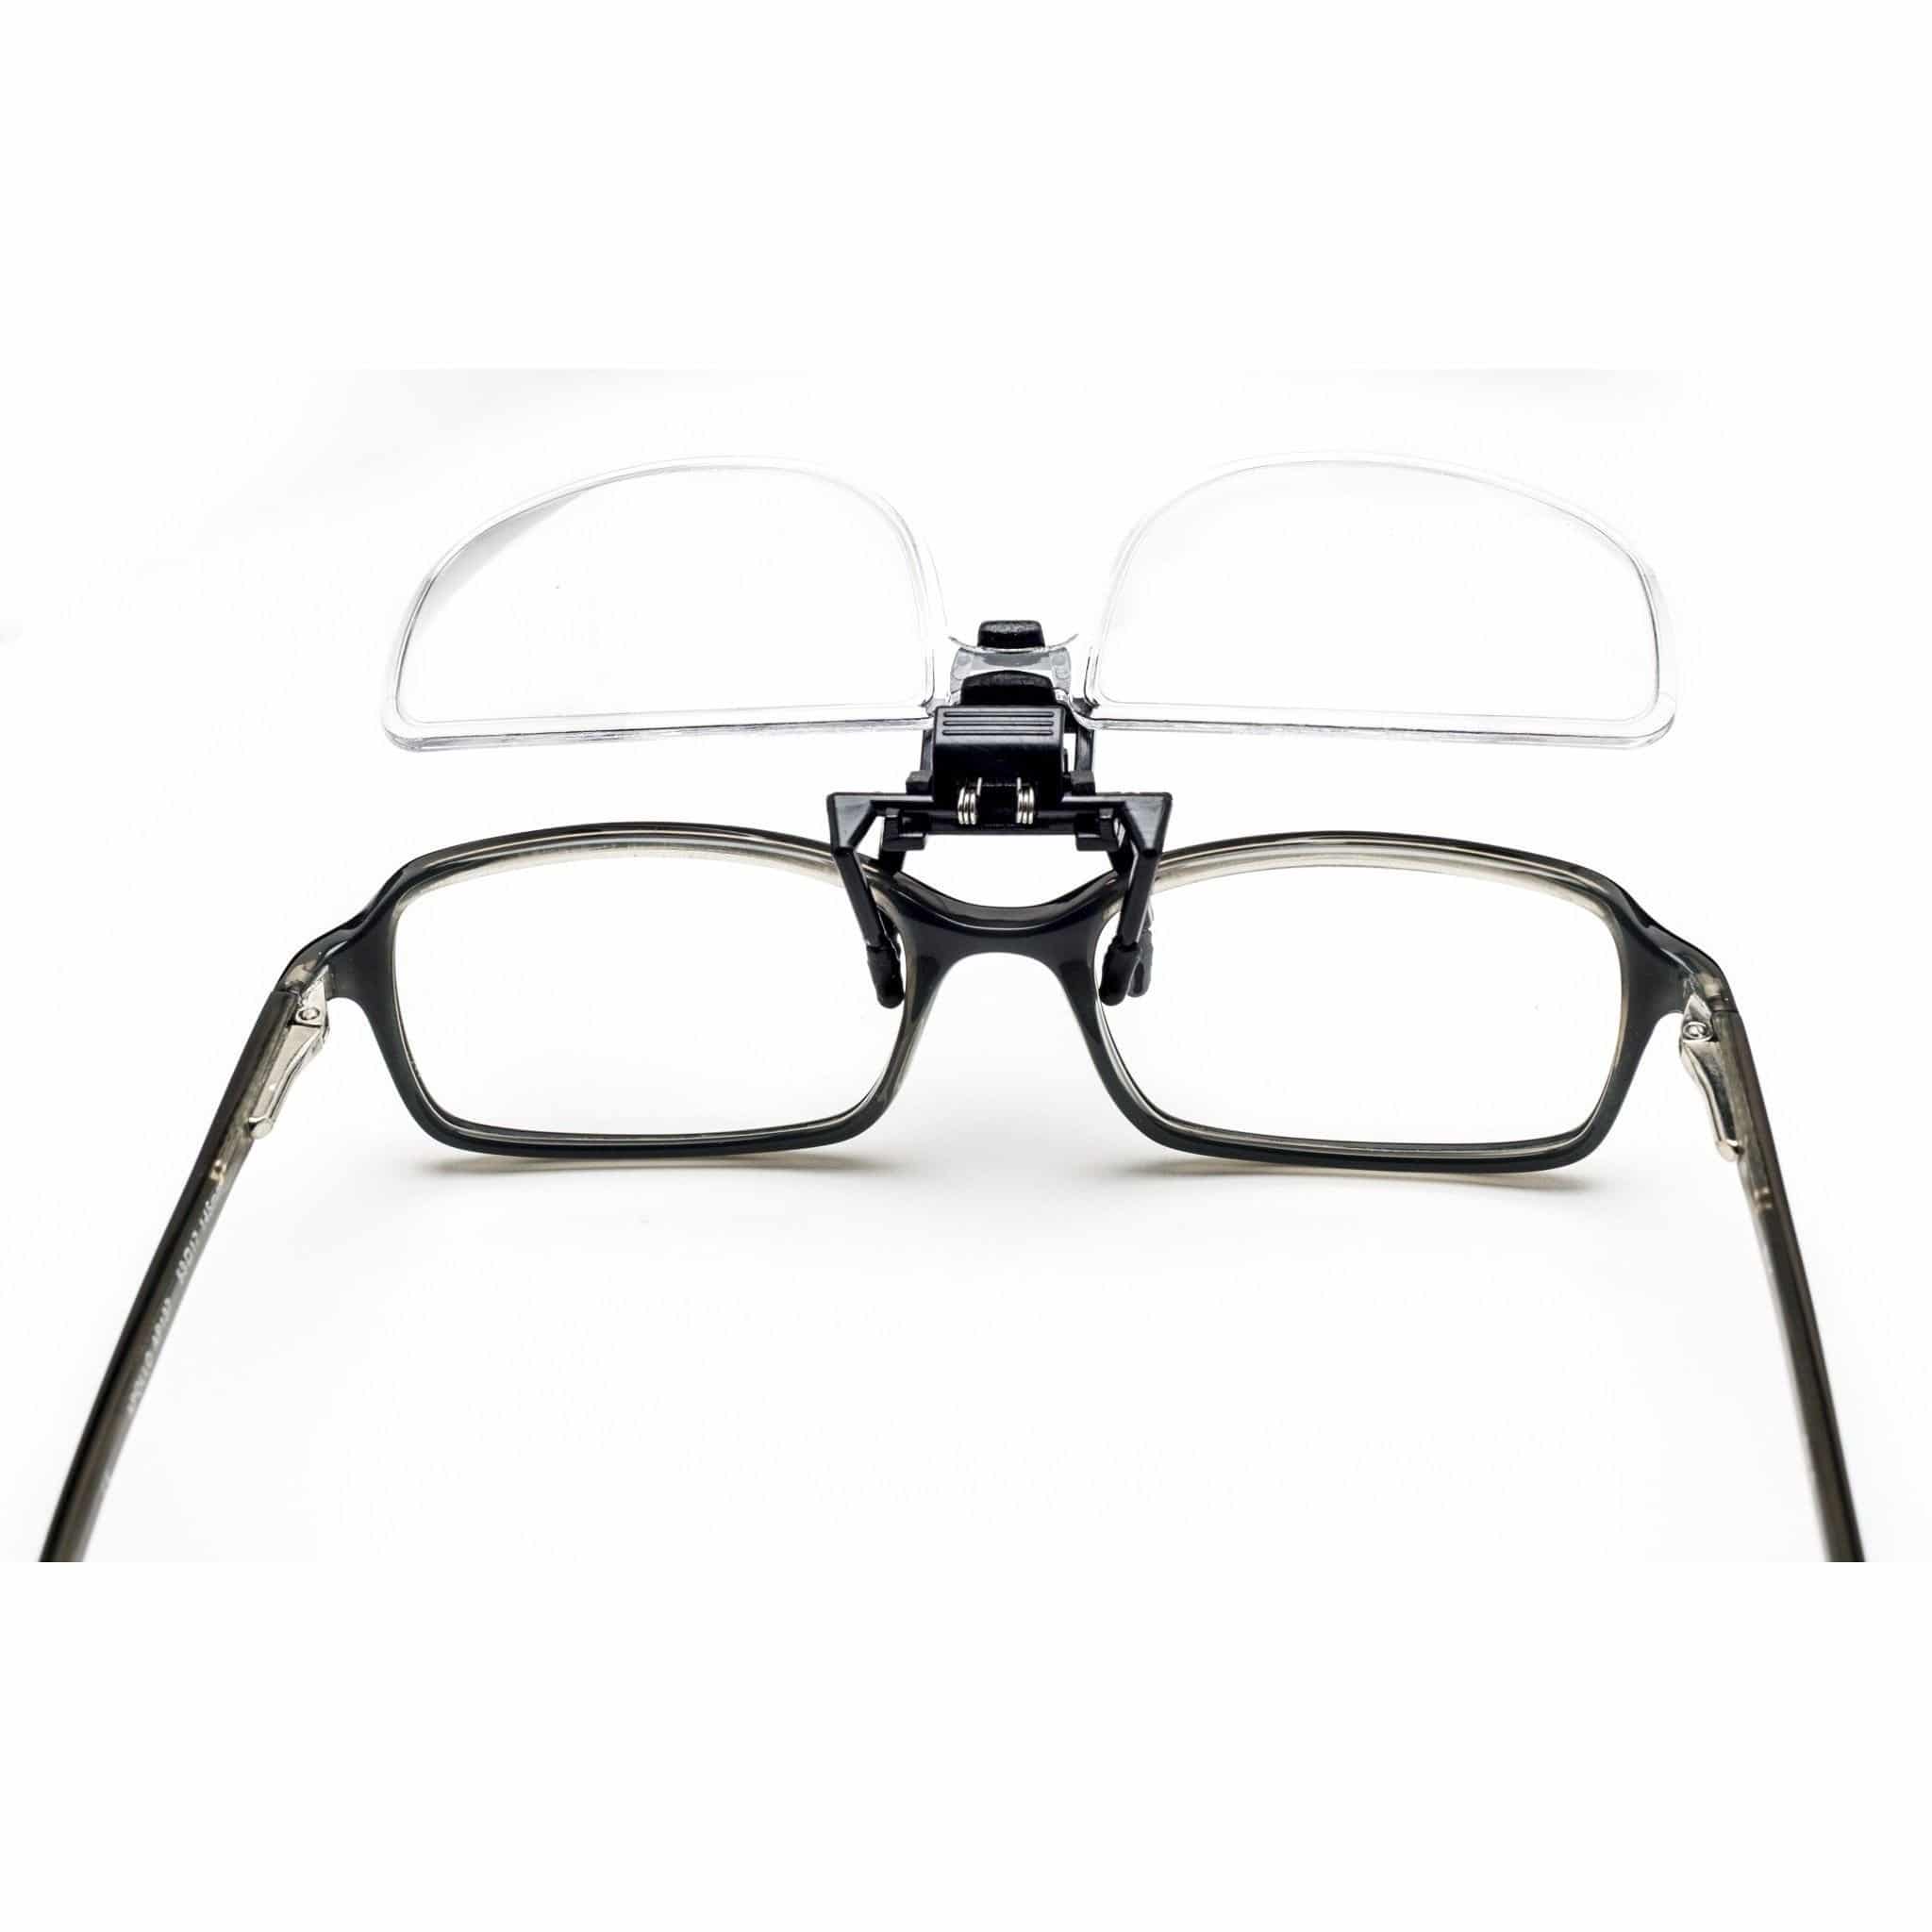 Clip-On Magnifying Reading Glasses - Safety Protection Glasses